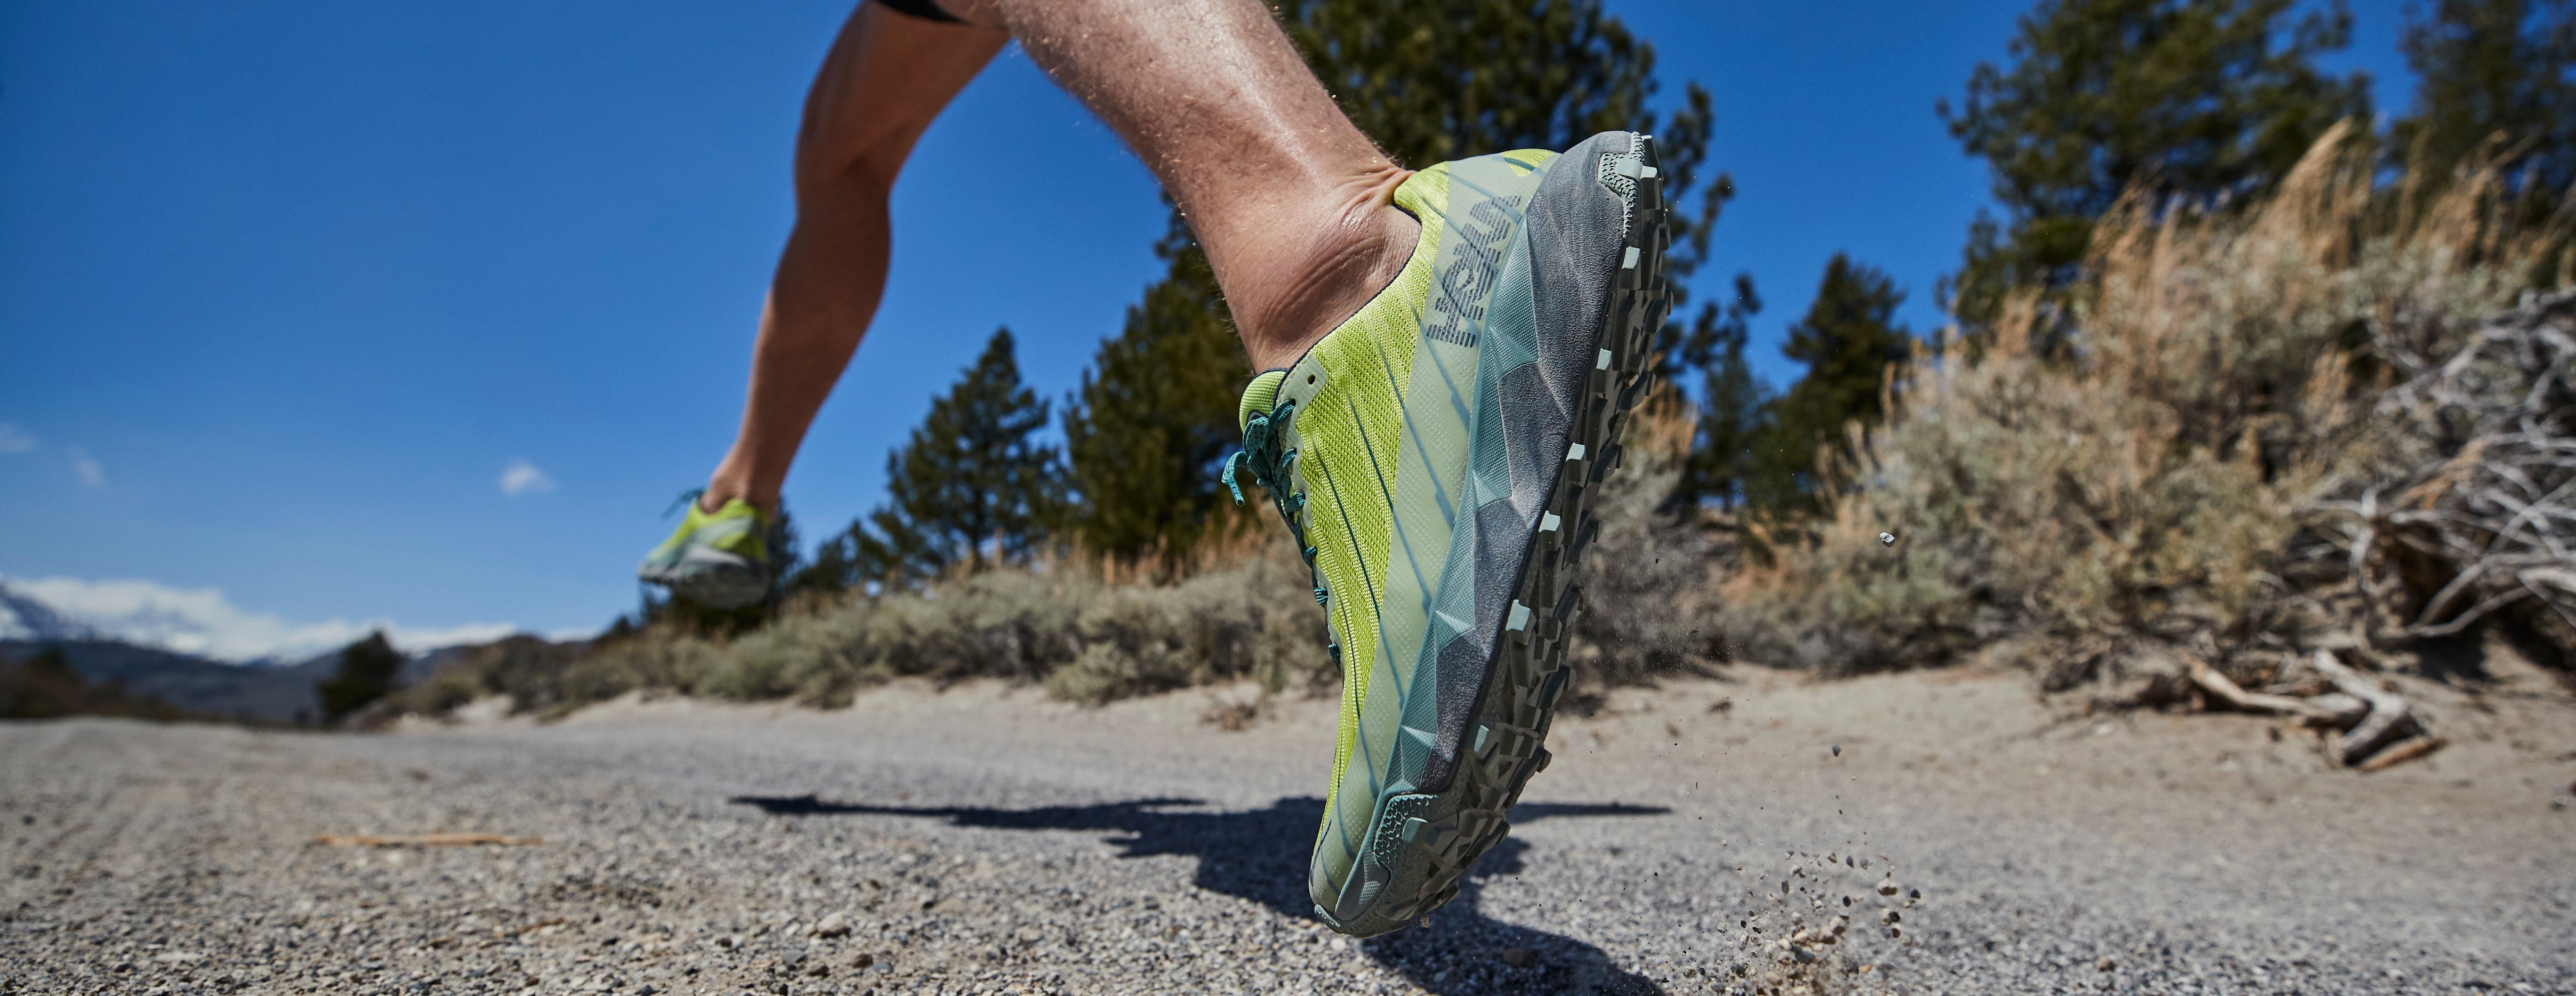 Hoka One One Torrent Trail Running Shoe - First Look - Grivet Outdoors